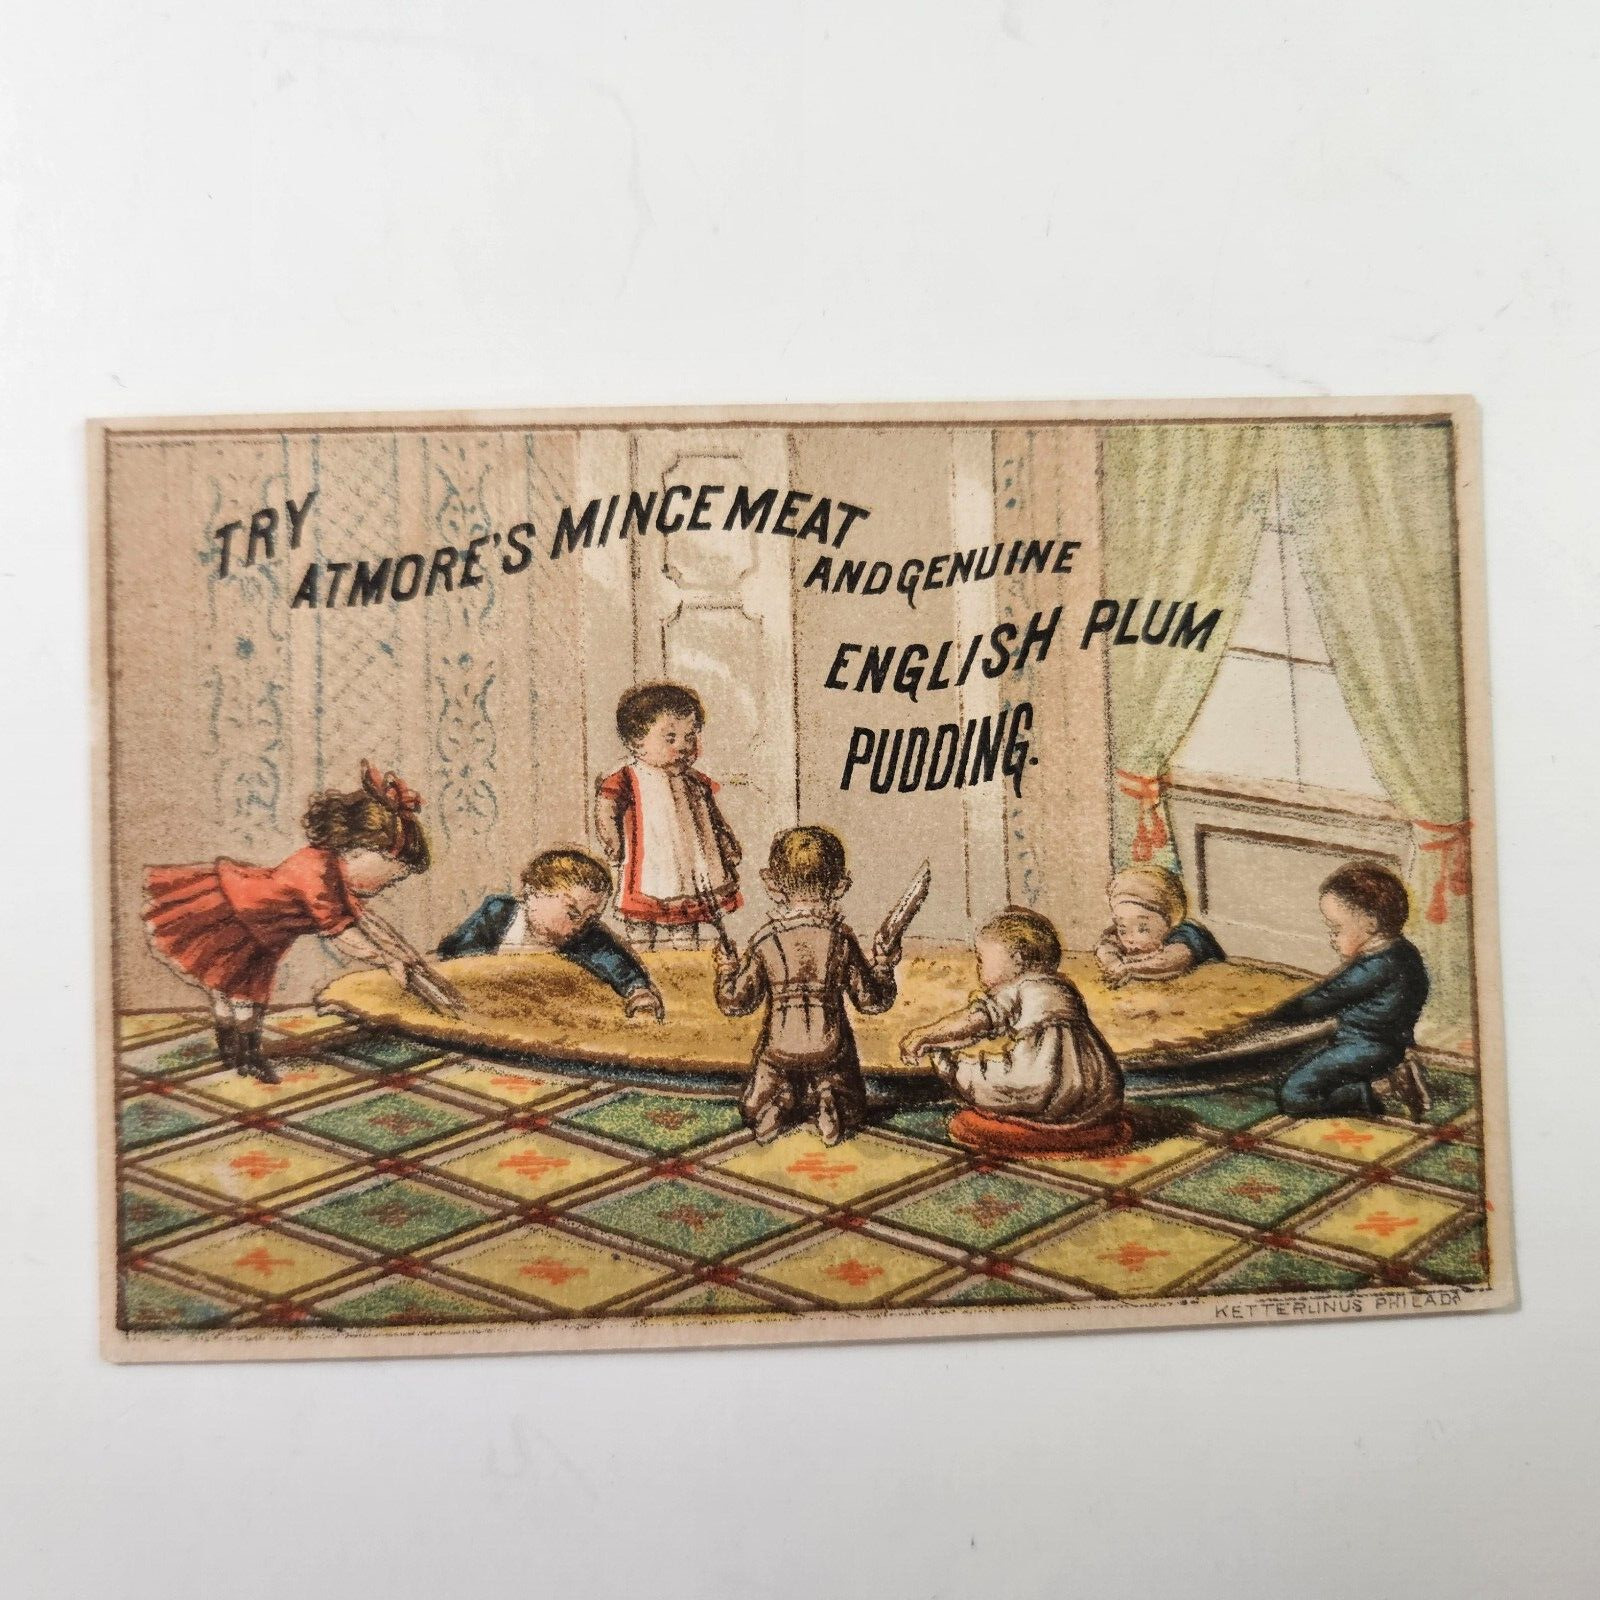 Late 1800\'s Atmore\'s Mince Meat & English Plum Pudding Trade Card $2.00 Ship NR